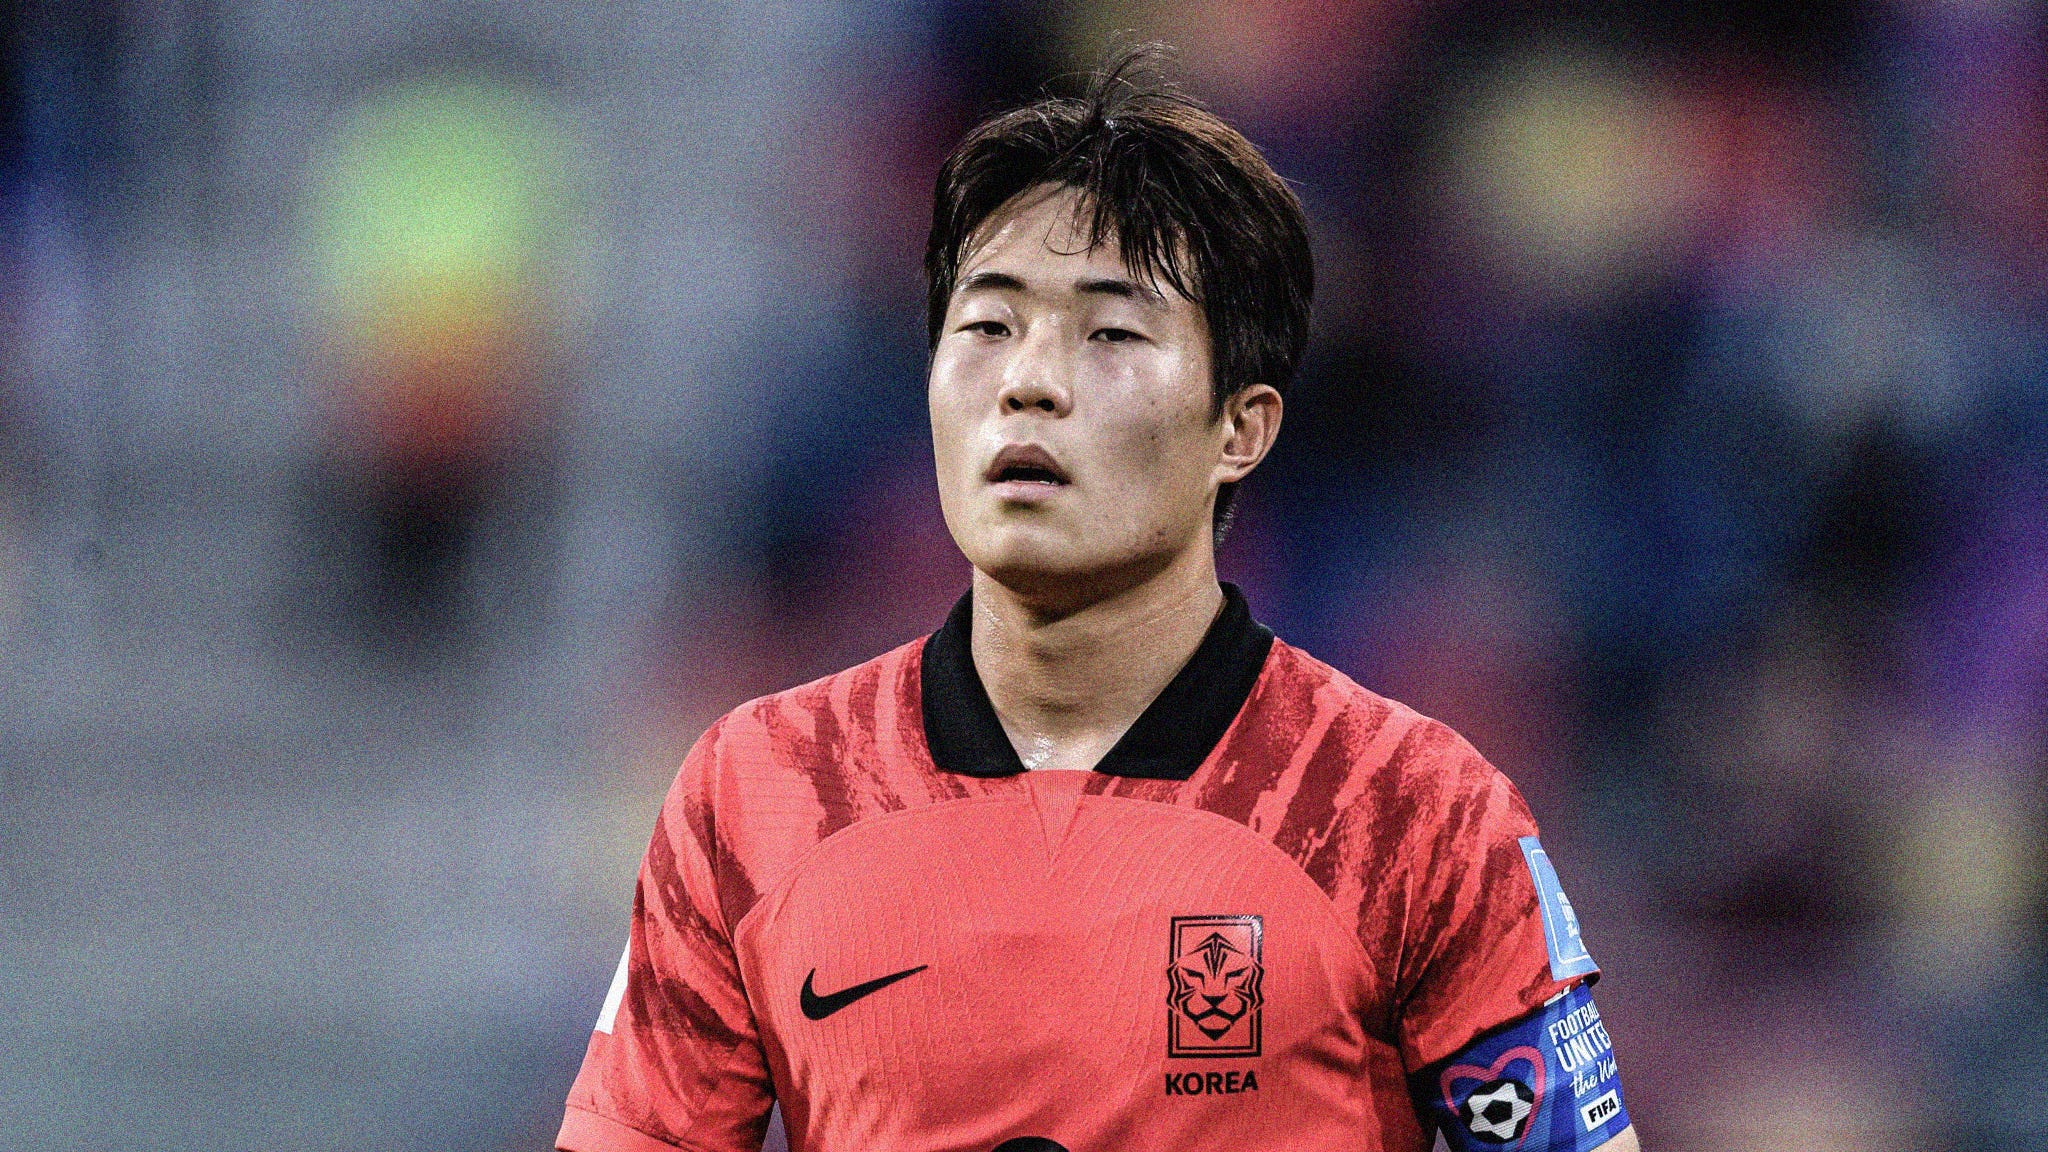 A photo of South Korea's Lee Seung-won at the 2023 FIFA U-20 World Cup